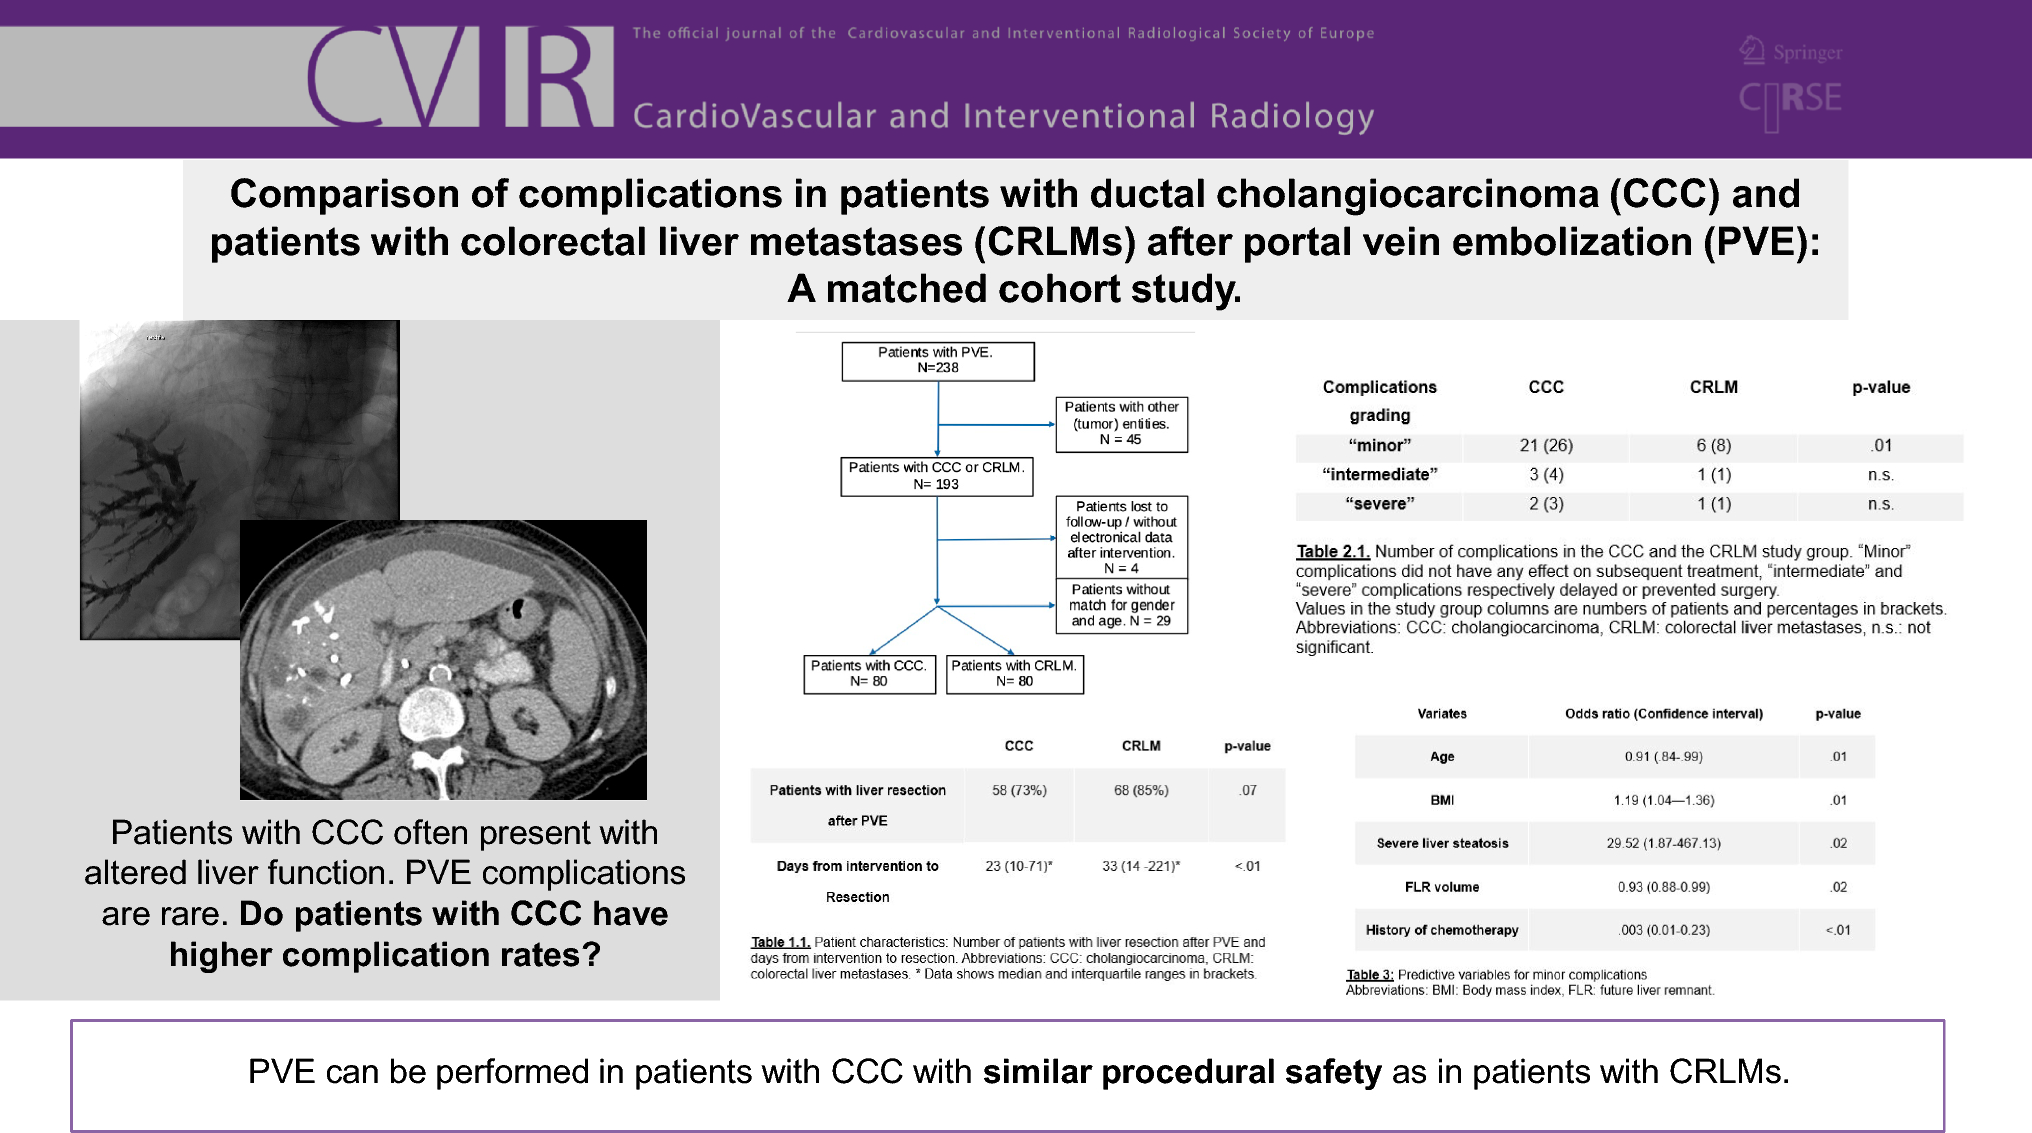 Comparison of Complications in Patients with Ductal Cholangiocarcinoma (CCC) and Patients with Colorectal Liver Metastases (CRLMs) After Portal Vein Embolization (PVE): A Matched Cohort Study